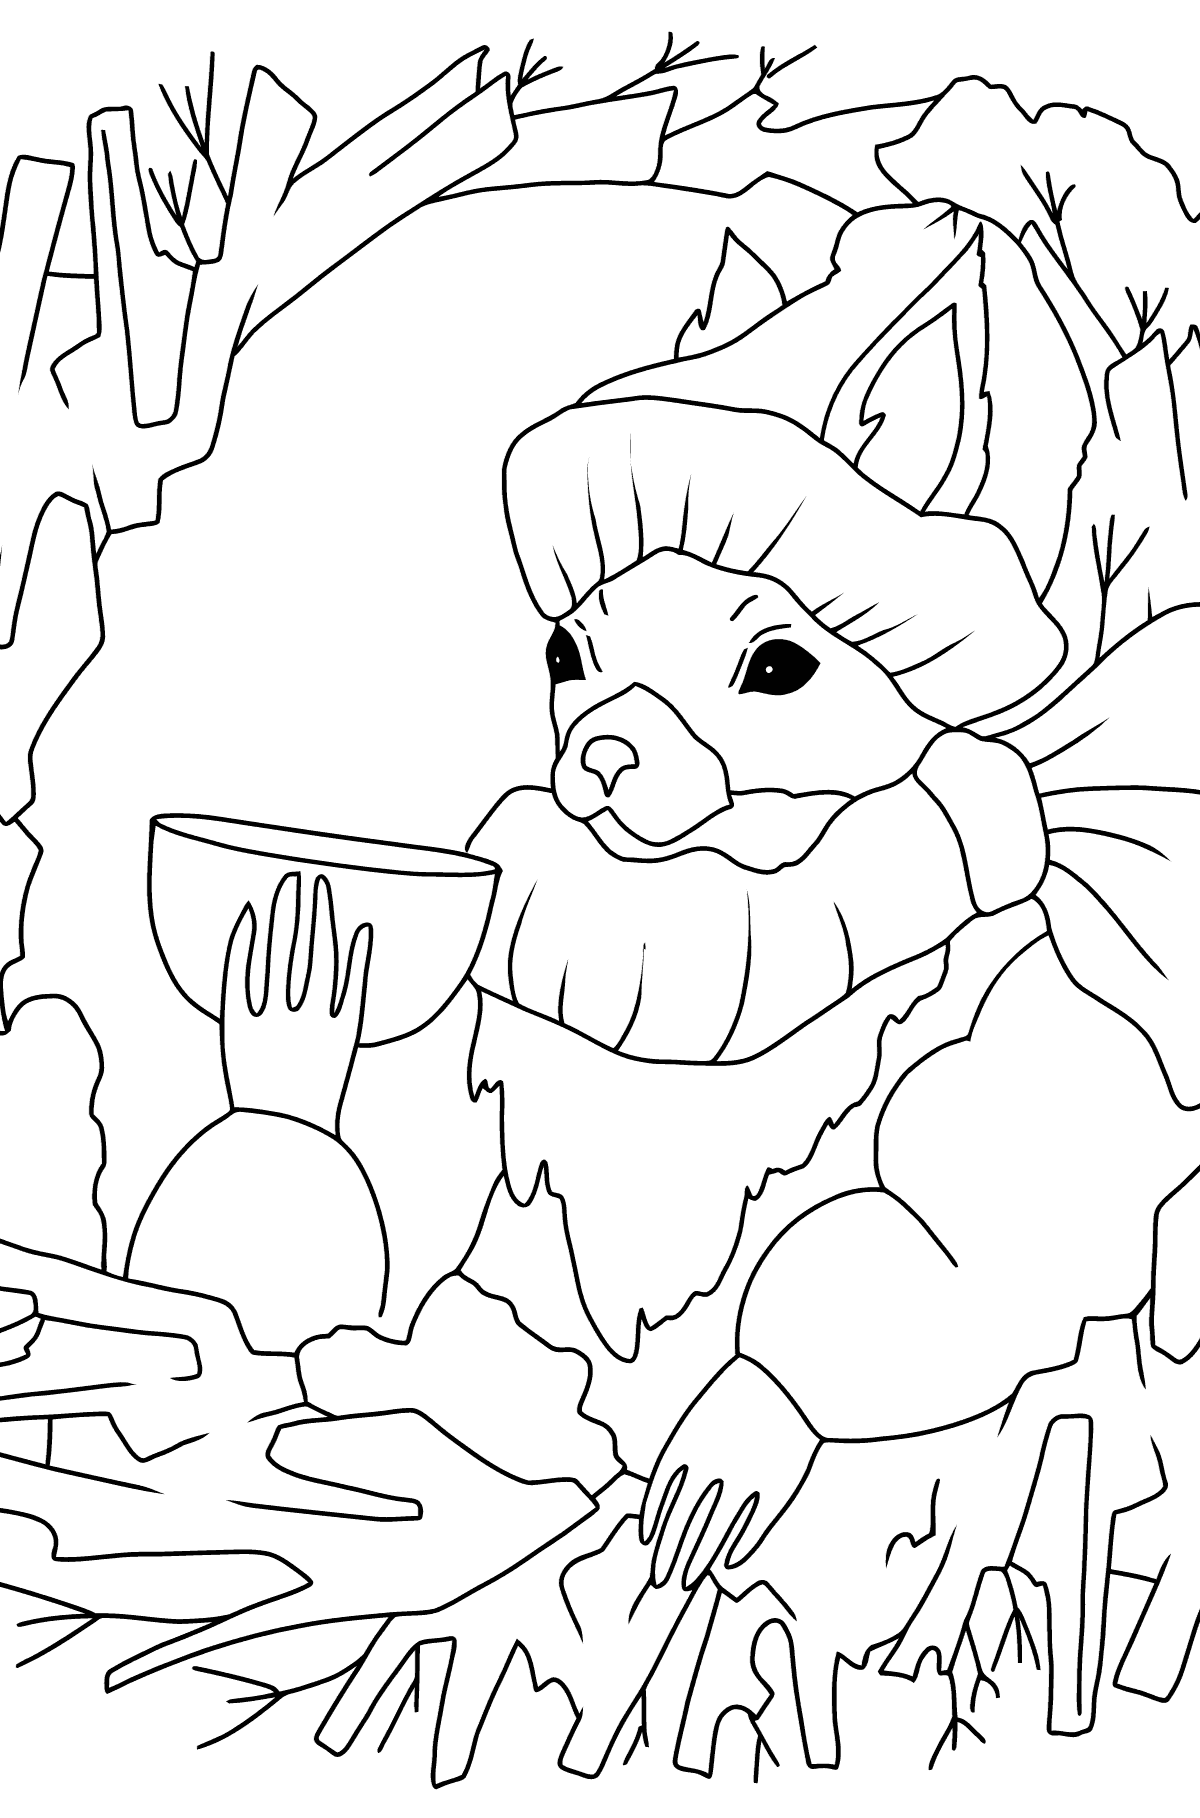 Squirrel coloring page for Toddlers ♥ Online and Print for Free